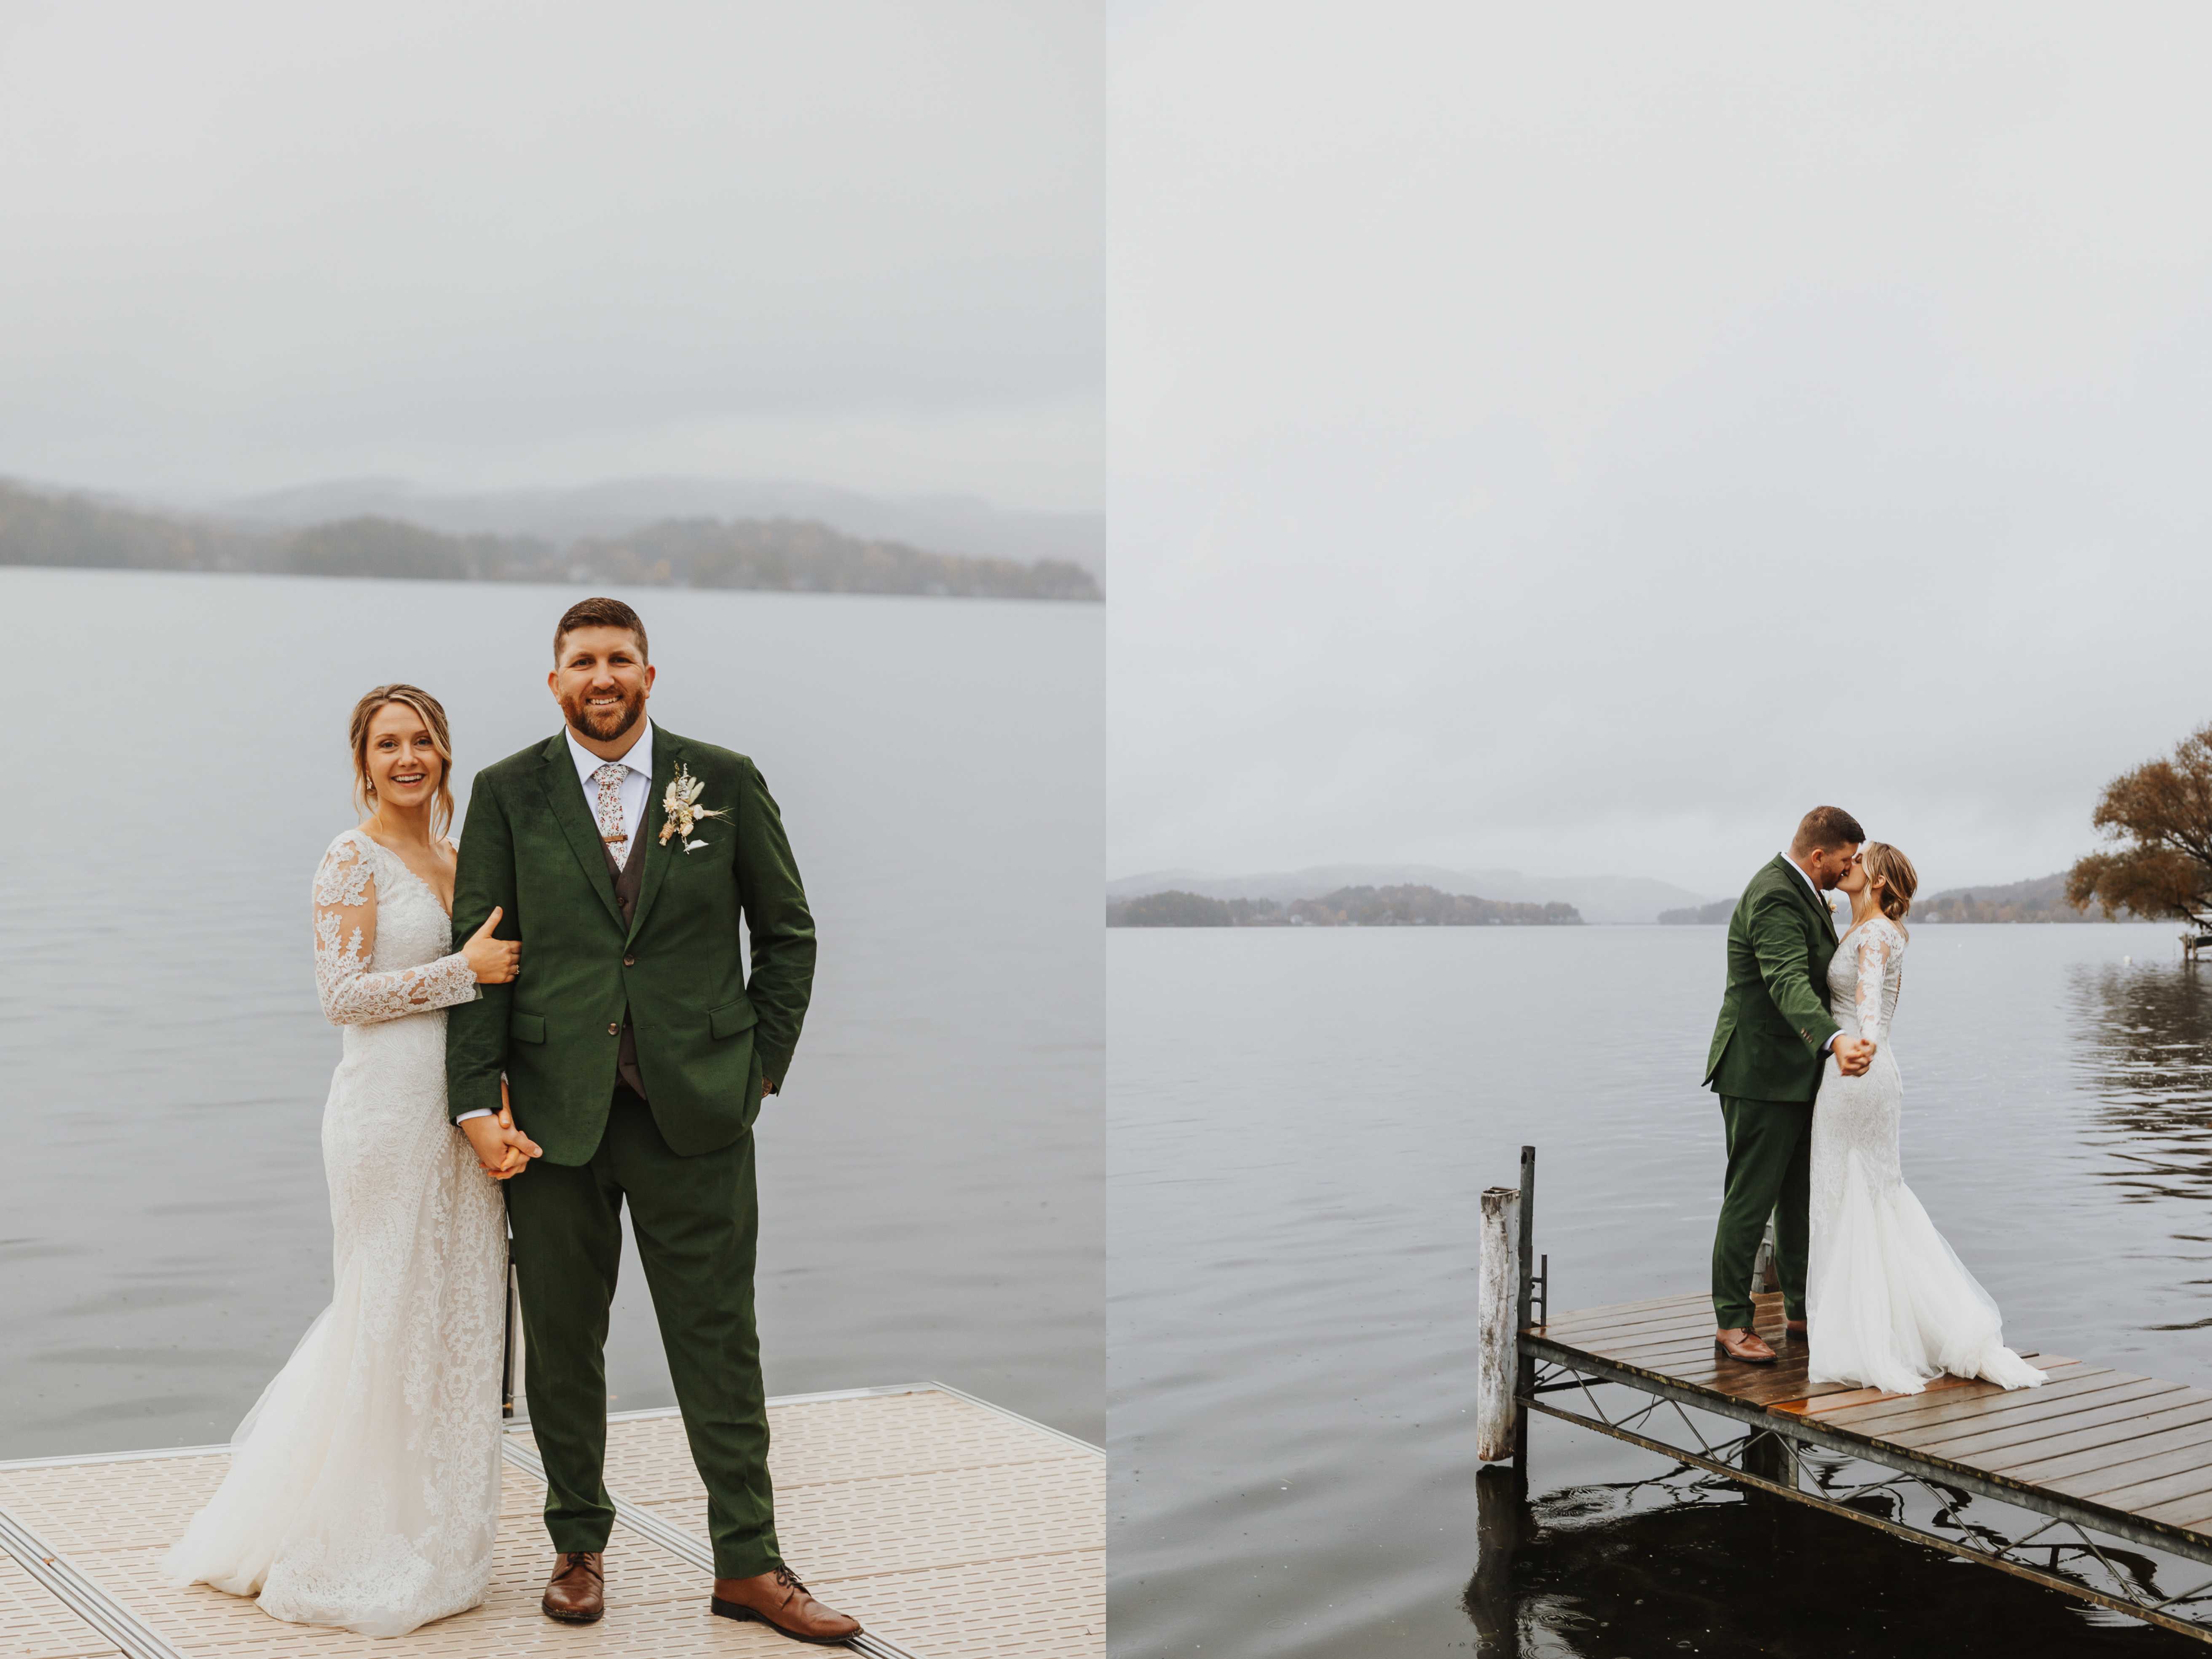 2 photos side by side, the left is a portrait photo of a bride and groom smiling at the camera while on a dock of Lake Bomoseen, the right is of the two kissing on the same dock